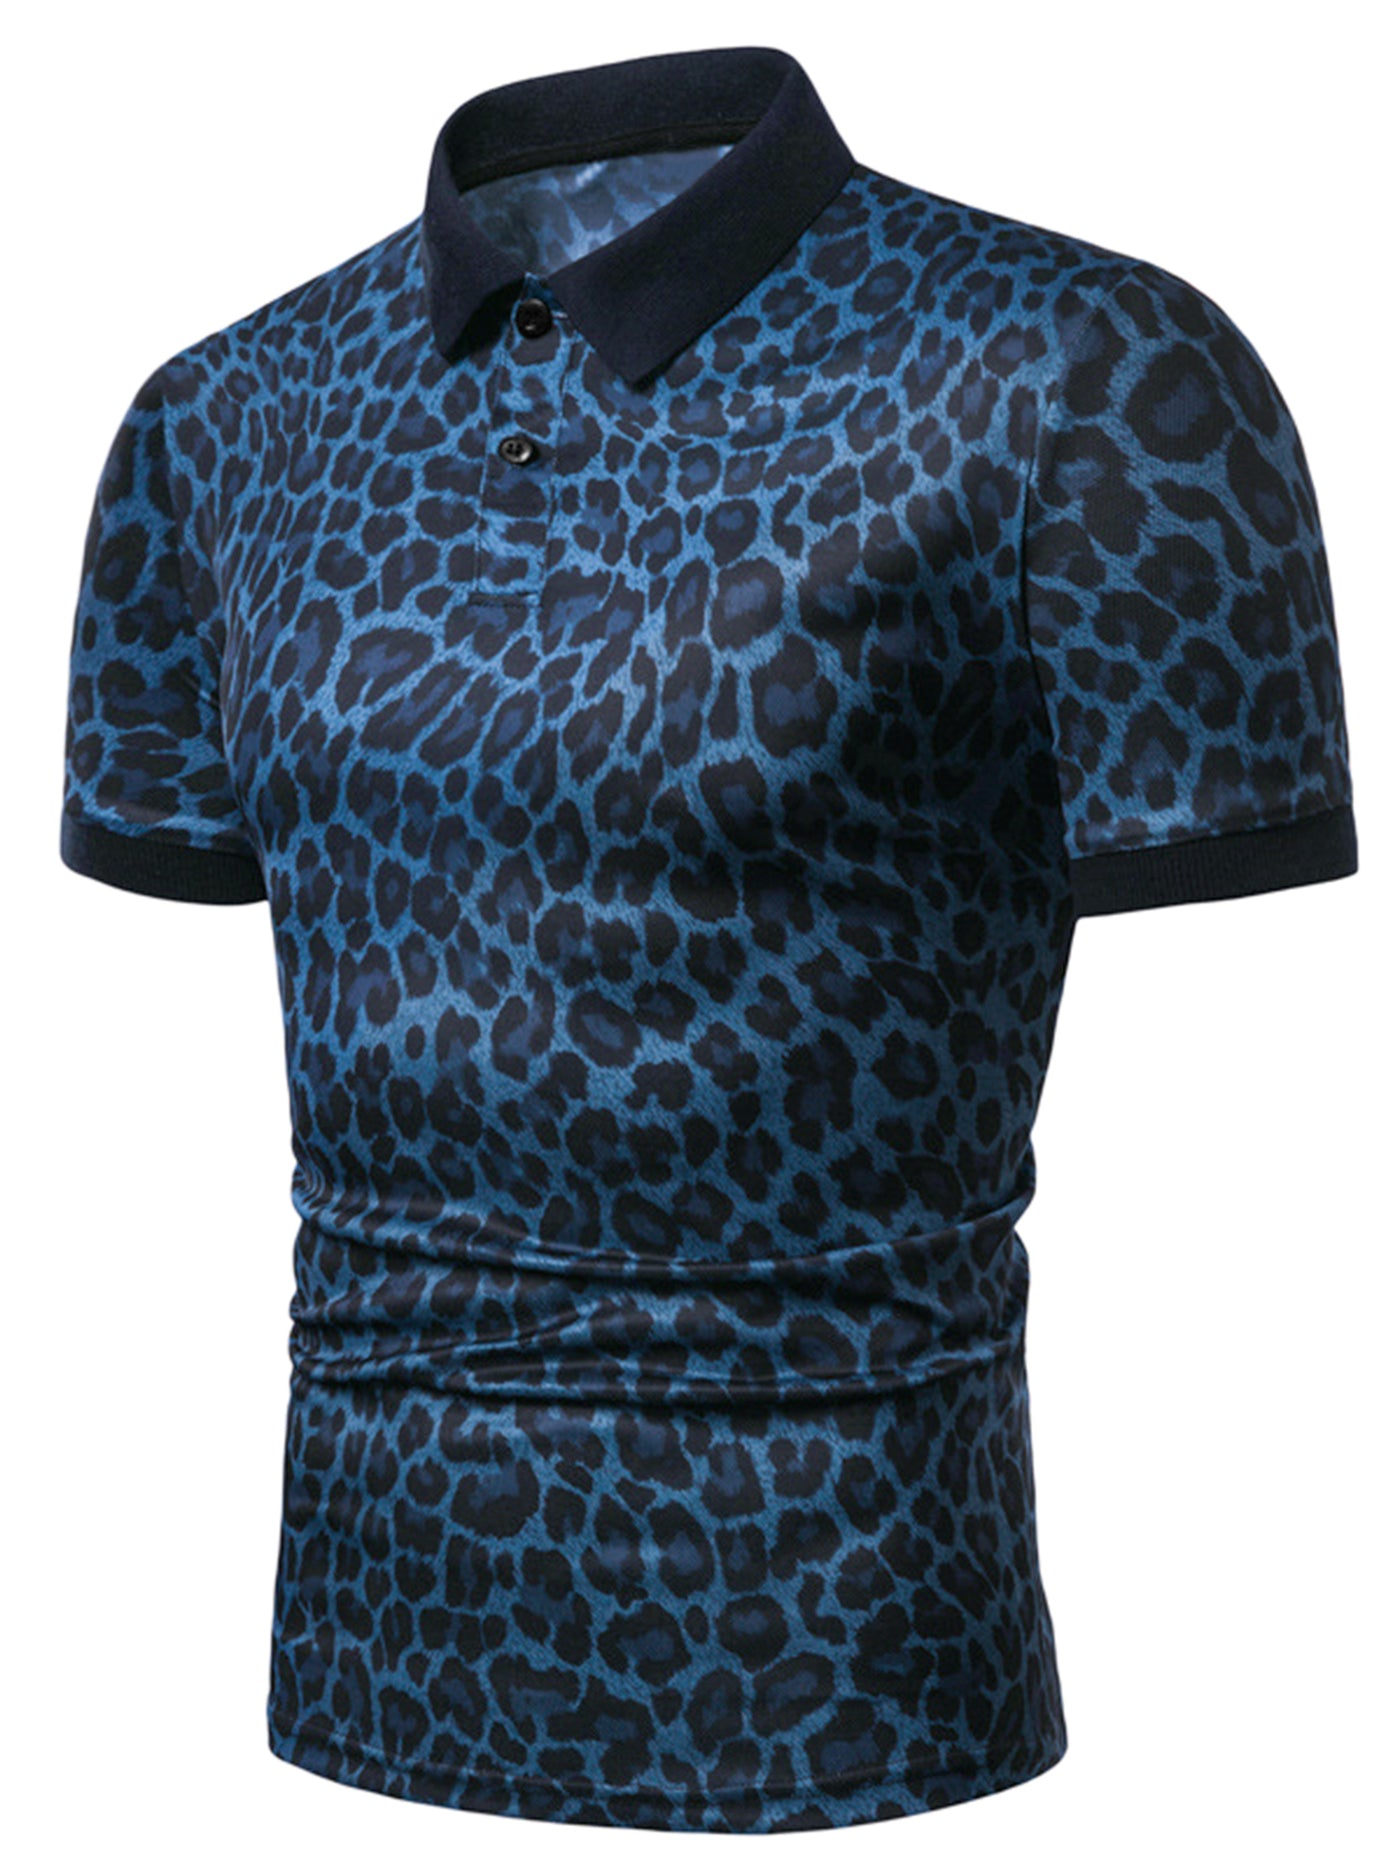 Bublédon Leopard Polo Shirts for Men's Short Sleeves Animal Printed Party Club Golf Shirt